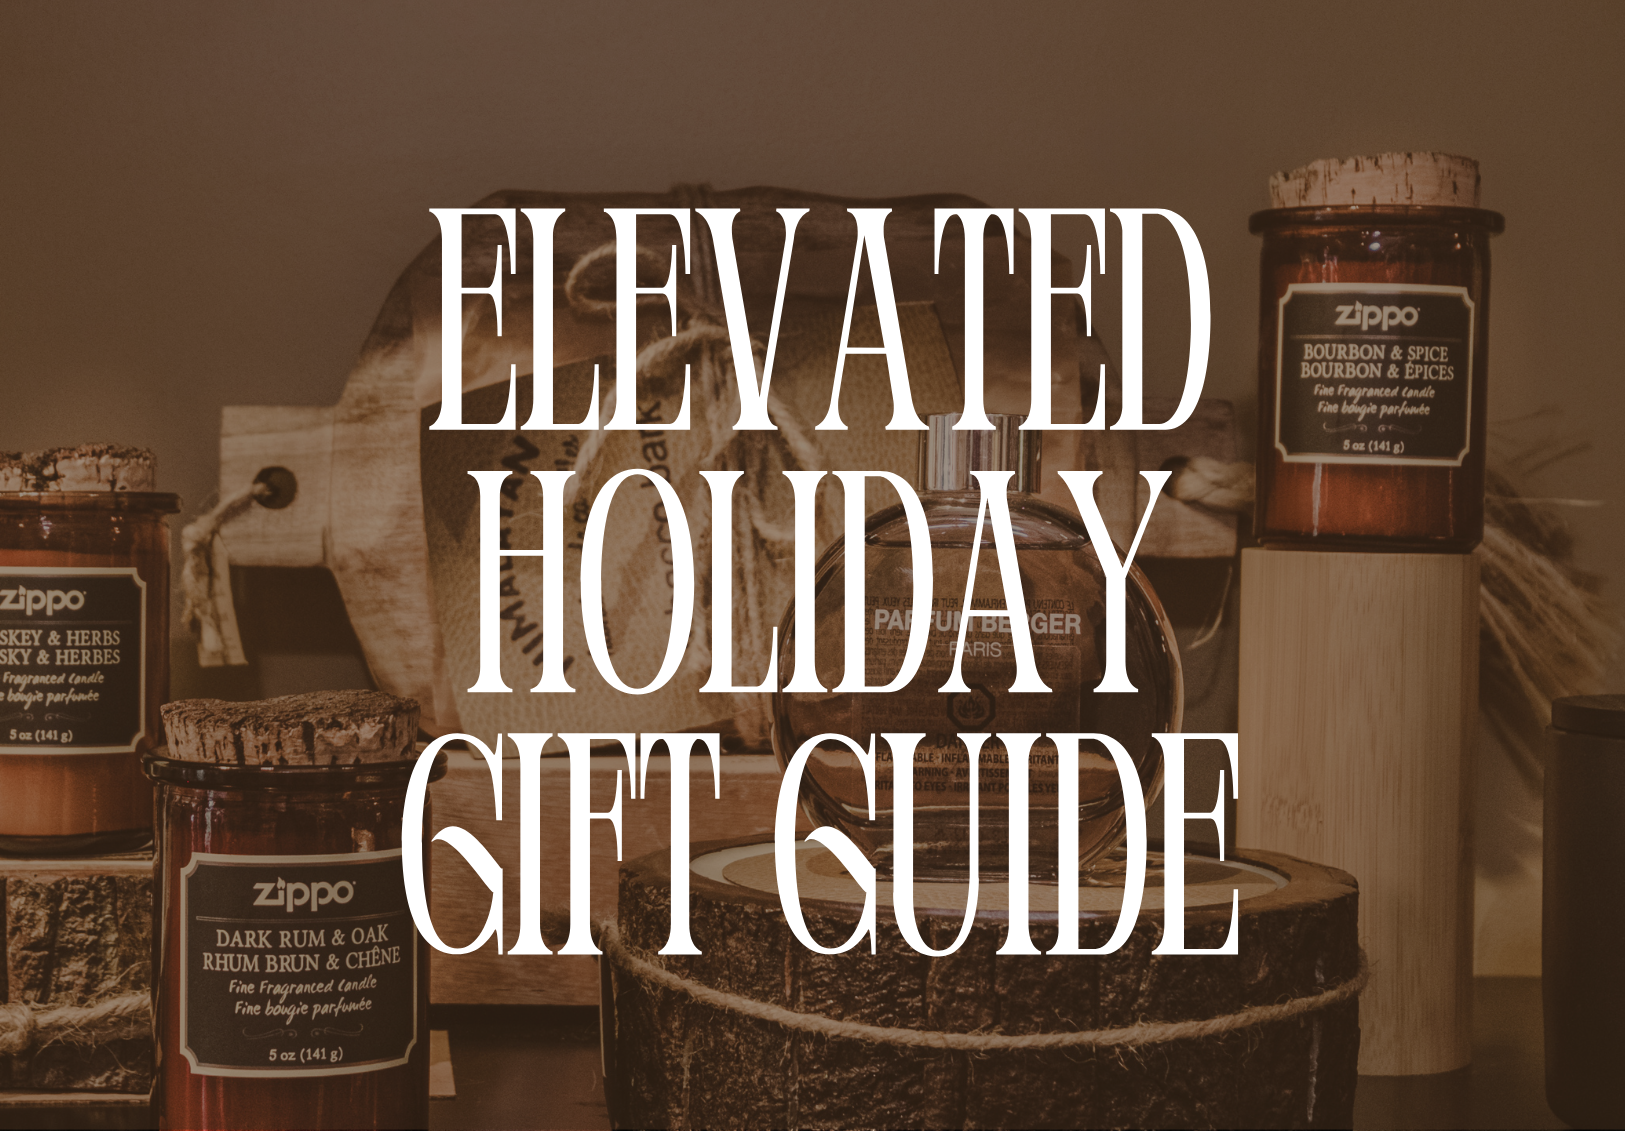 The Elevated Lifestyle Gift Guide